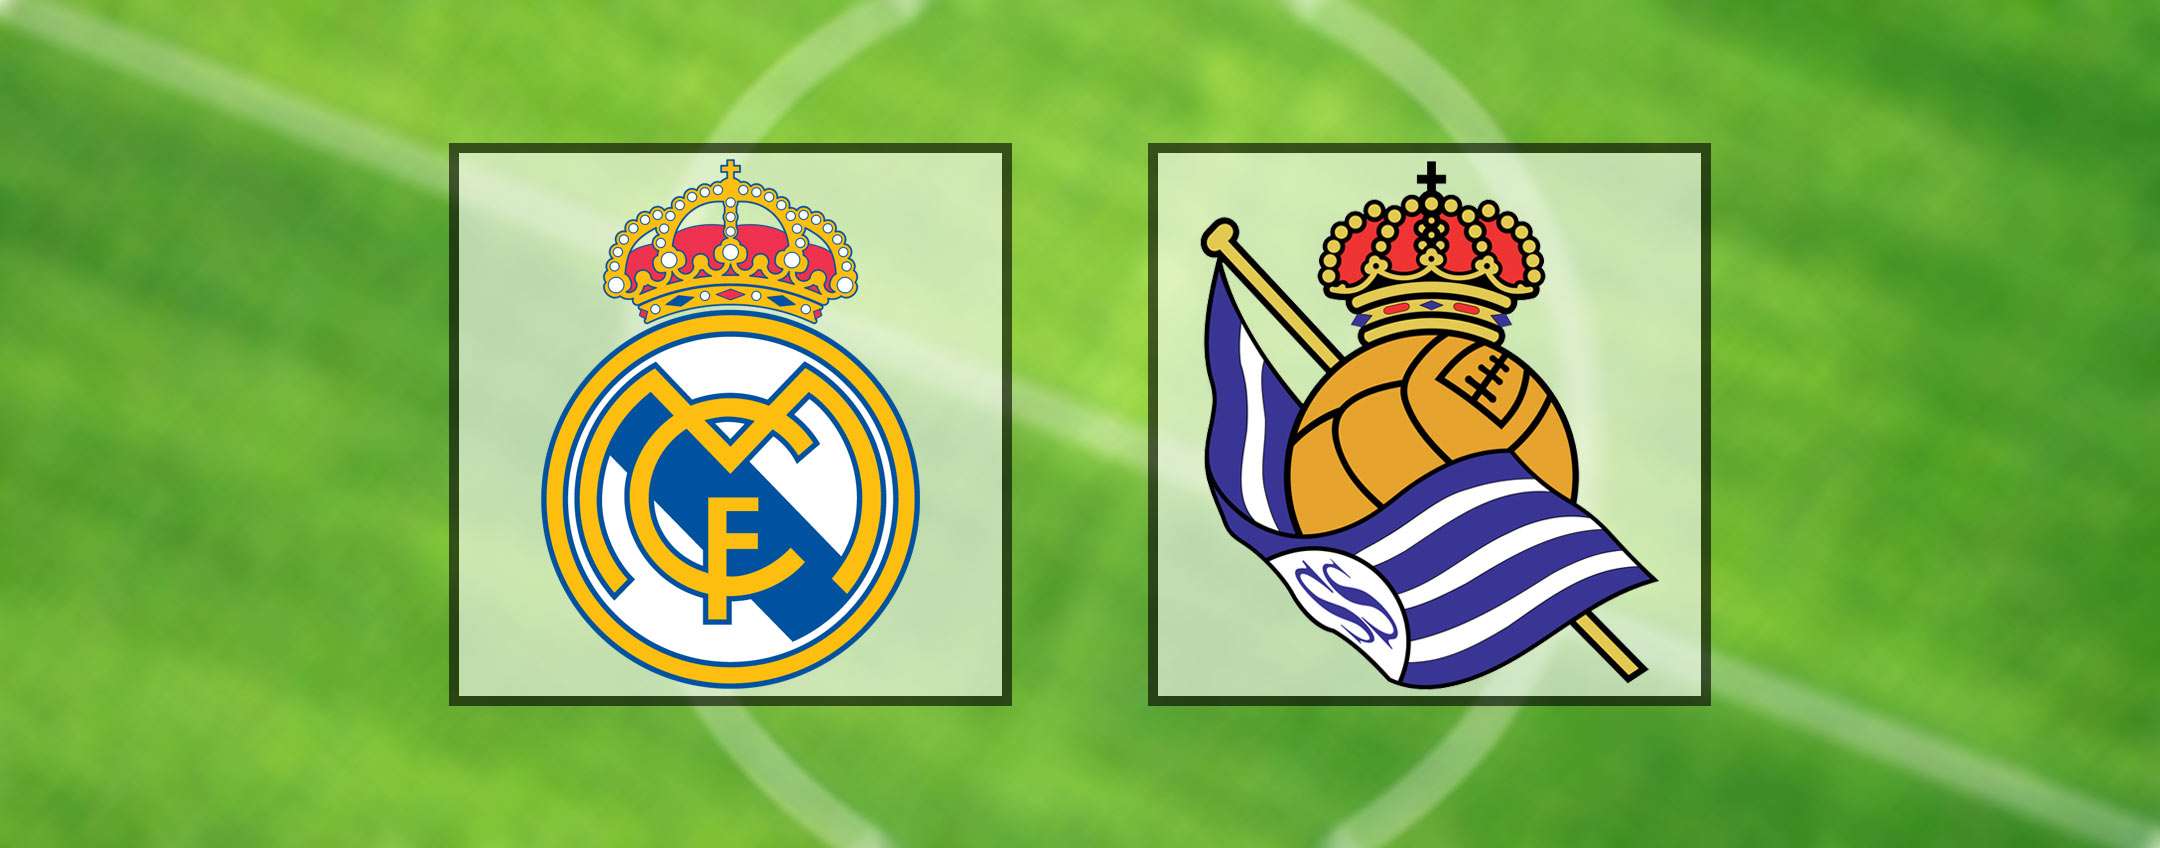 Come vedere Real Madrid-Real Sociedad in streaming (LaLiga)